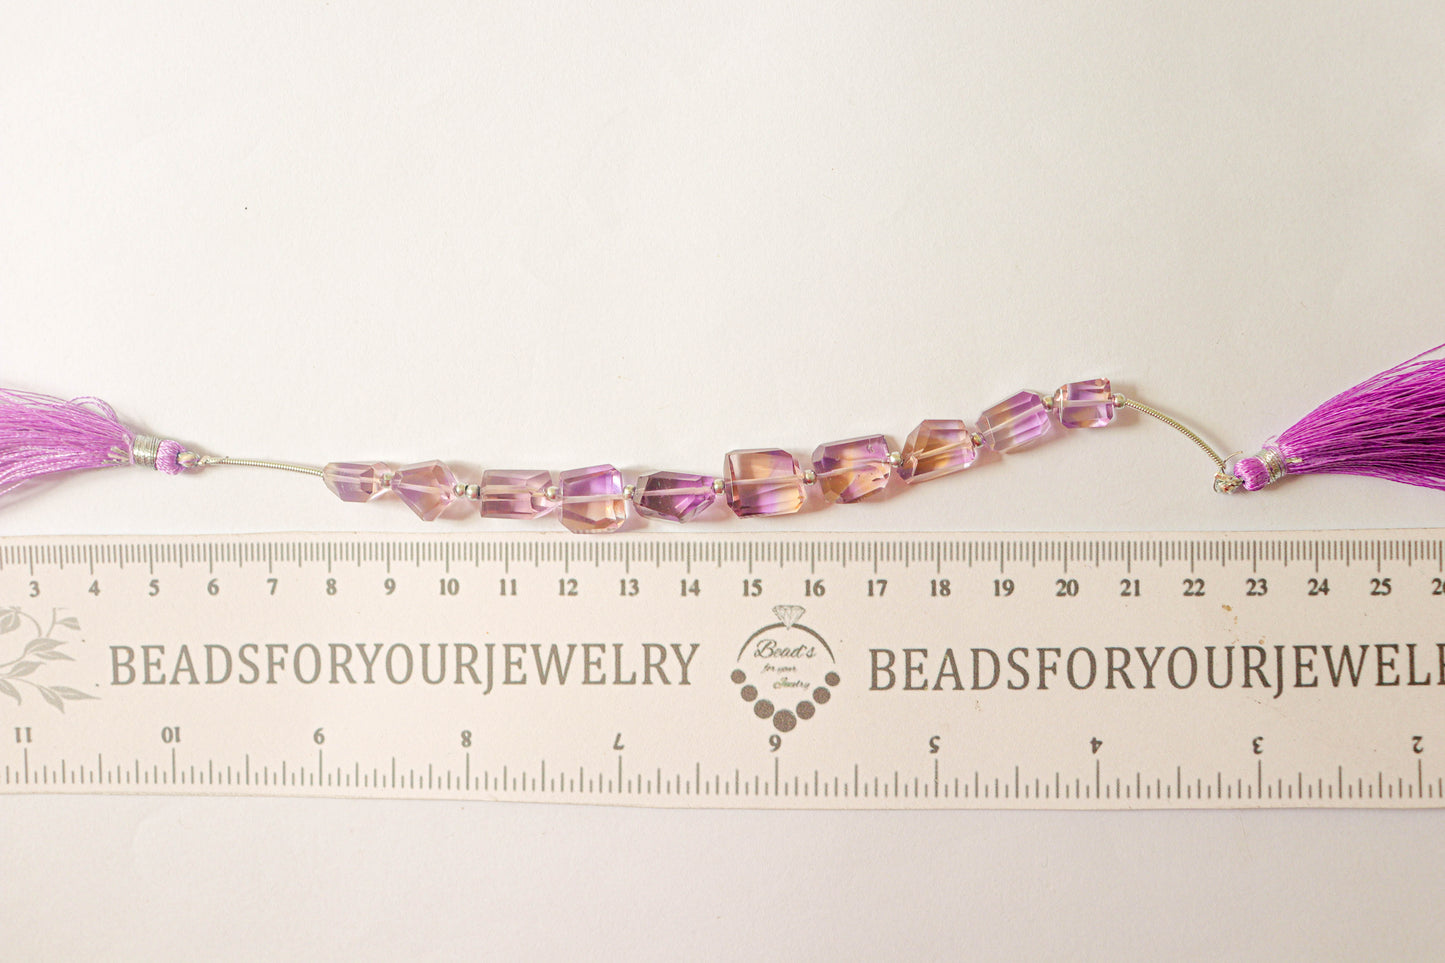 Ametrine Beads Uneven Shape Faceted Tumbles | 8x10mm-10x12mm | 10 Pieces | 5 inch | High Quality Ametrine Gemstone | Beadsforyourjewellery Beadsforyourjewelry